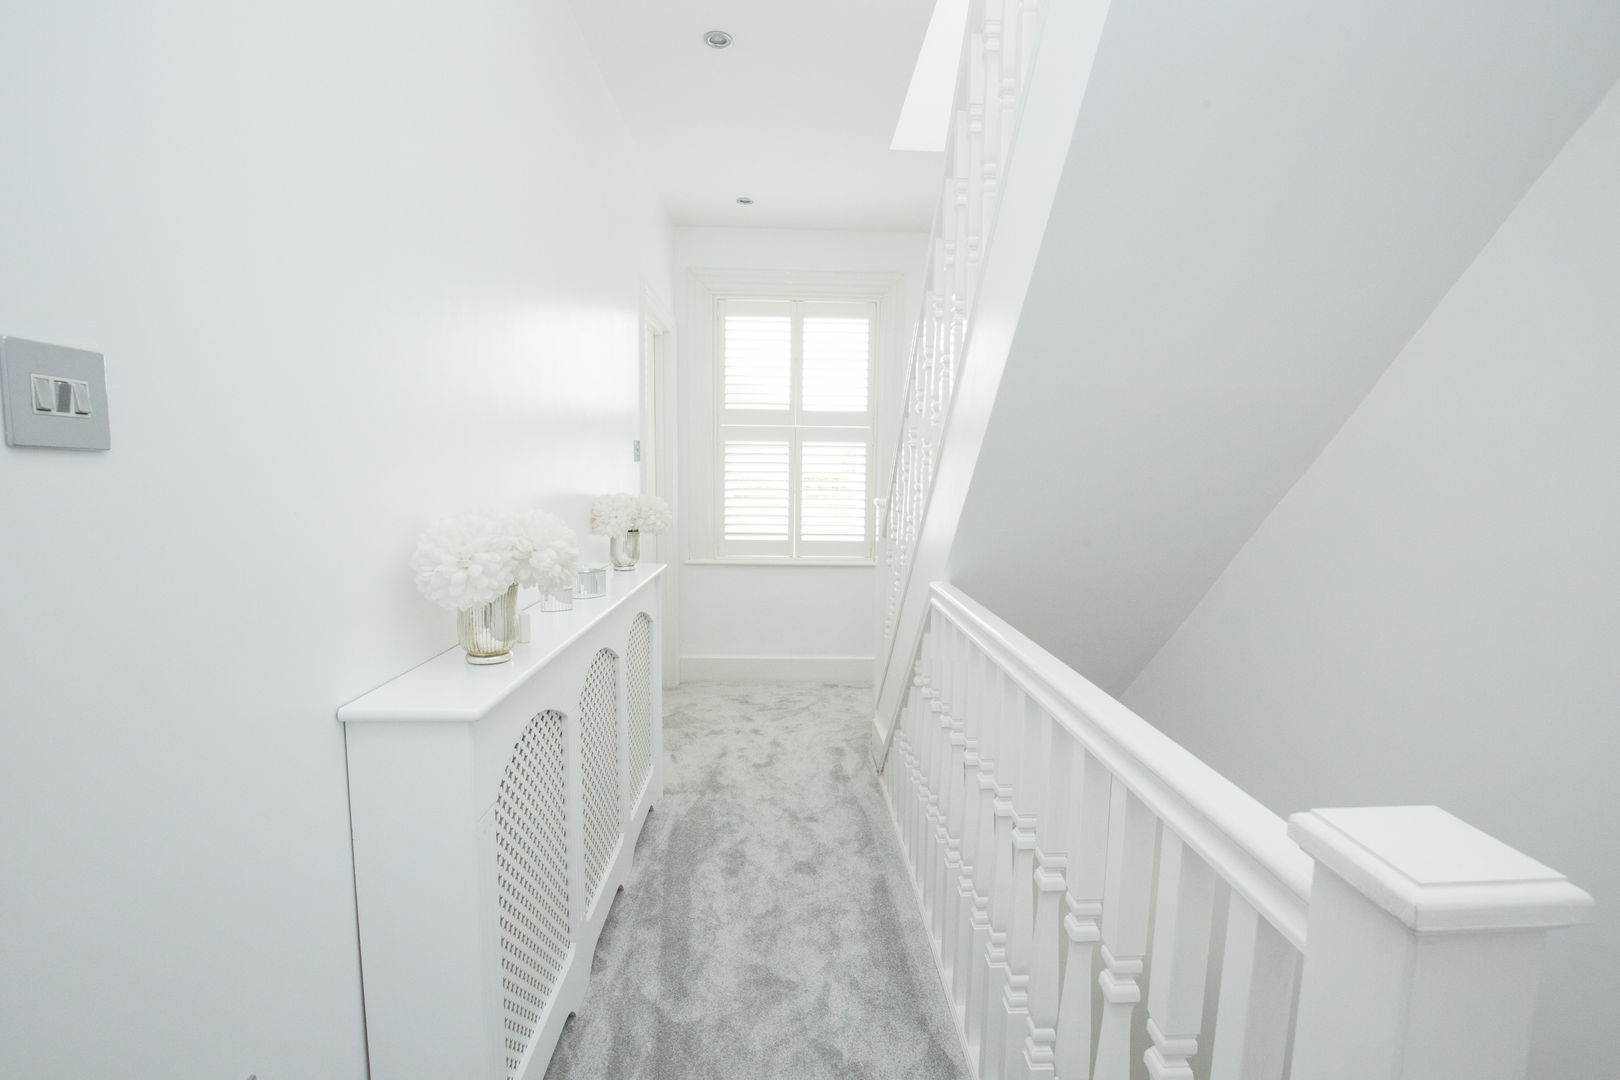 A hallway for the glamorous! homify Modern corridor, hallway & stairs hallway,silver,white